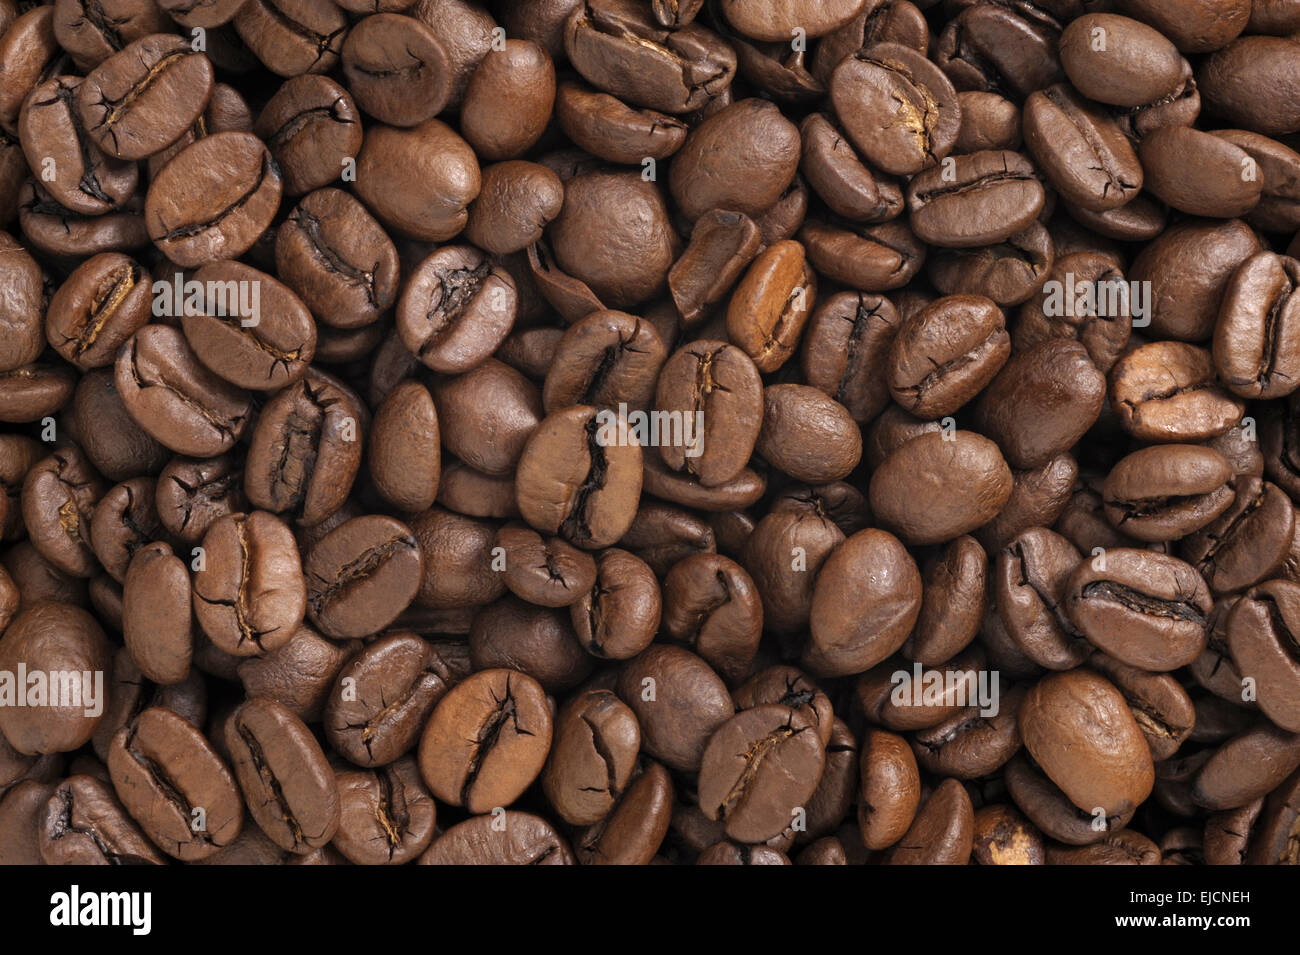 detail of brown roasted coffee beans Stock Photo